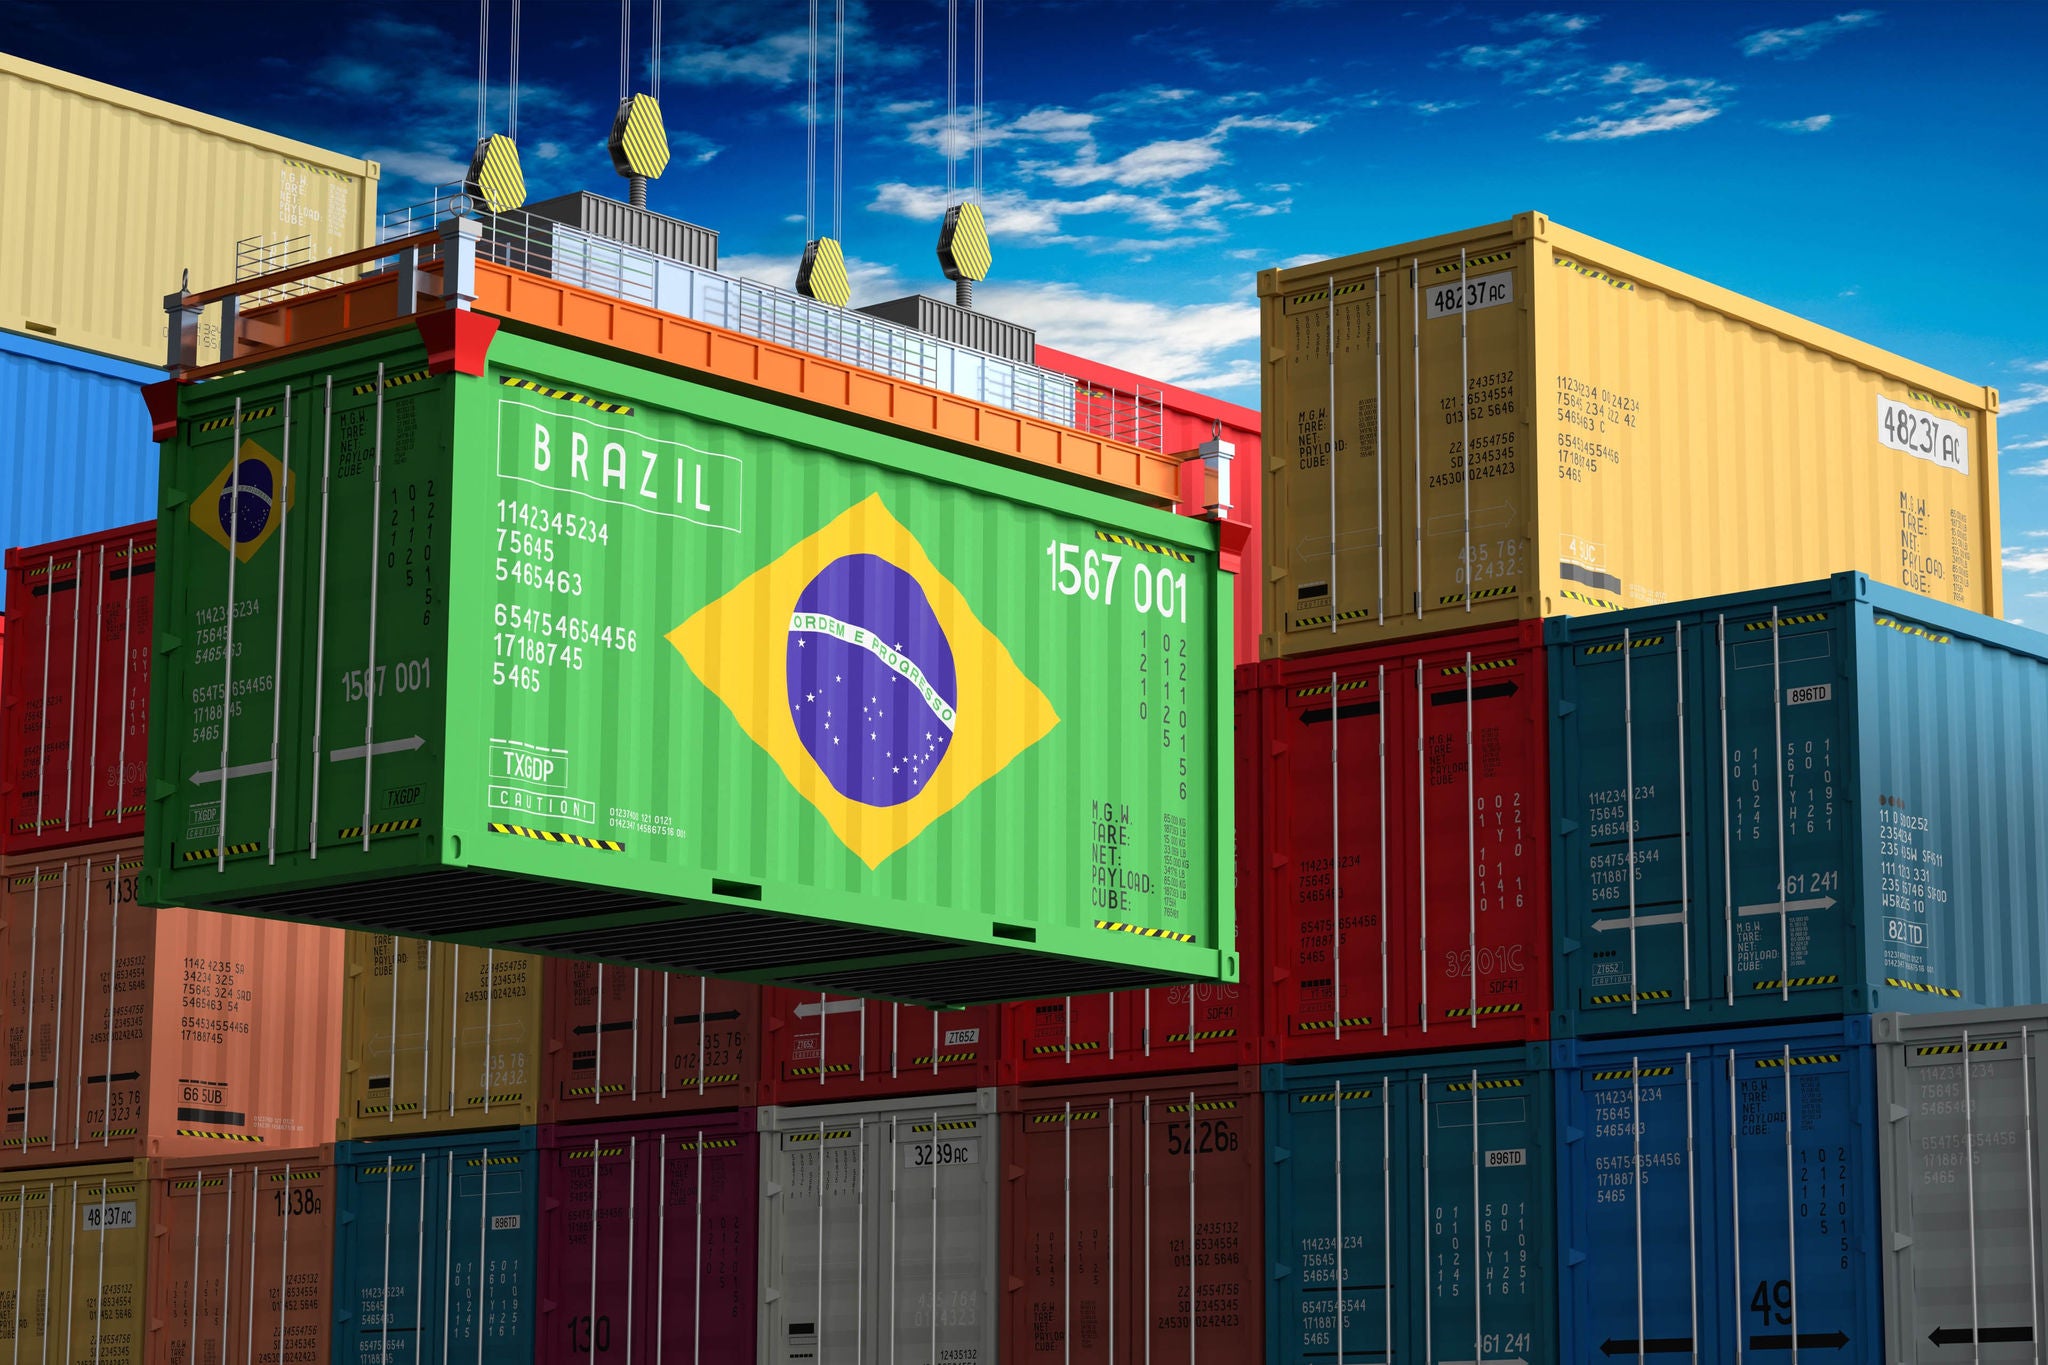 Freight shipping container with flag of Brazil on crane hook